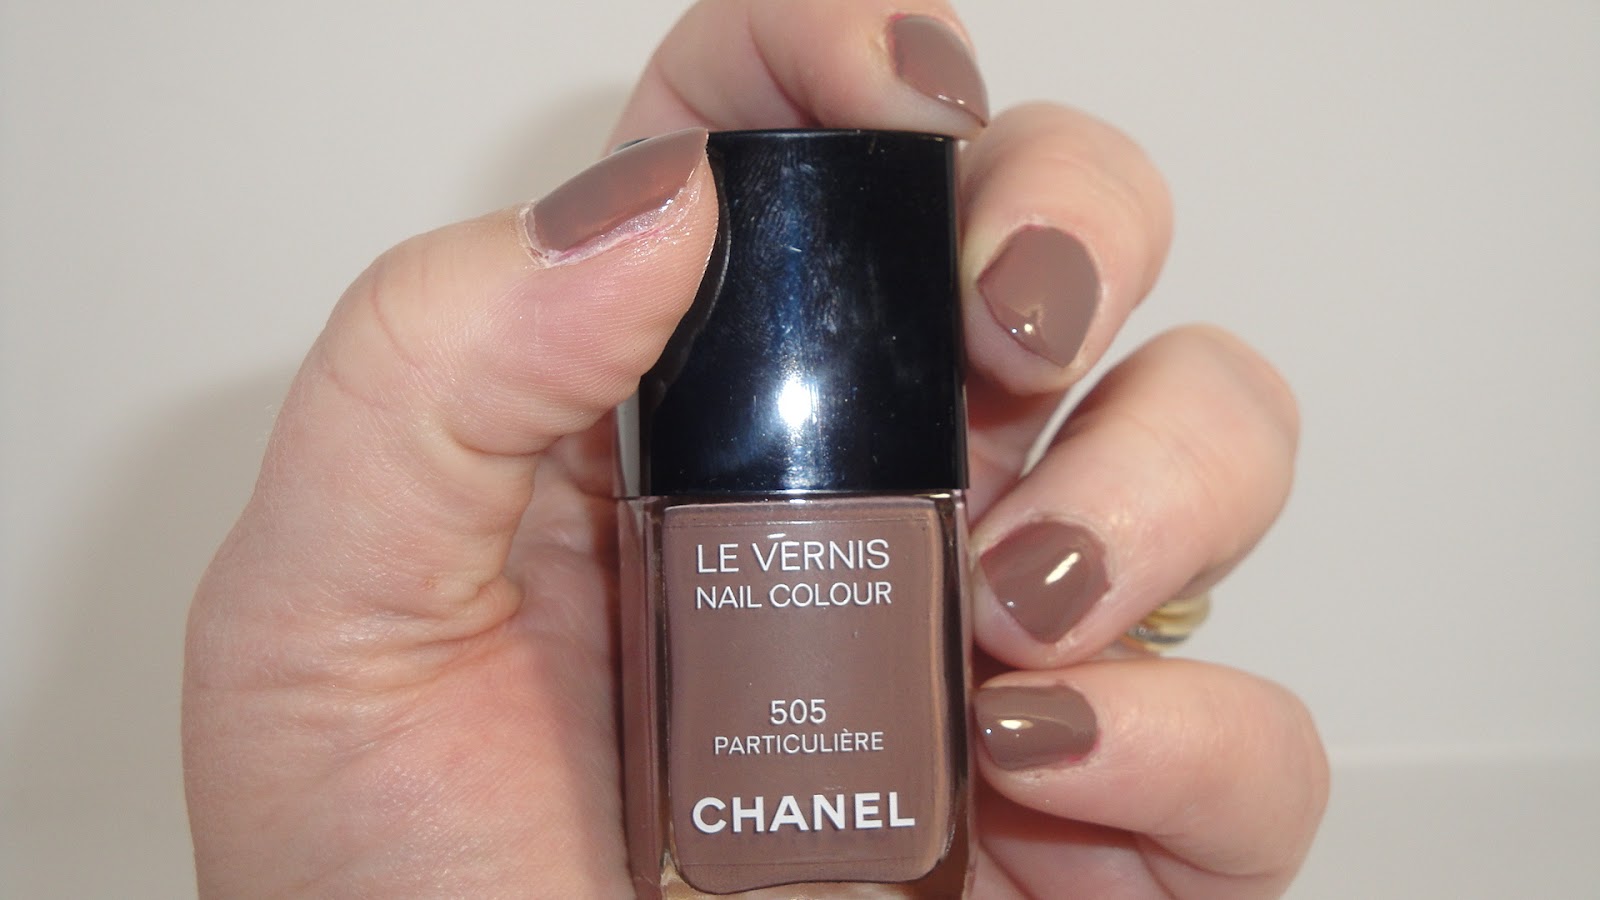 Chanel Le Vernis Longwear Nail Colour in Particuliere - wide 5